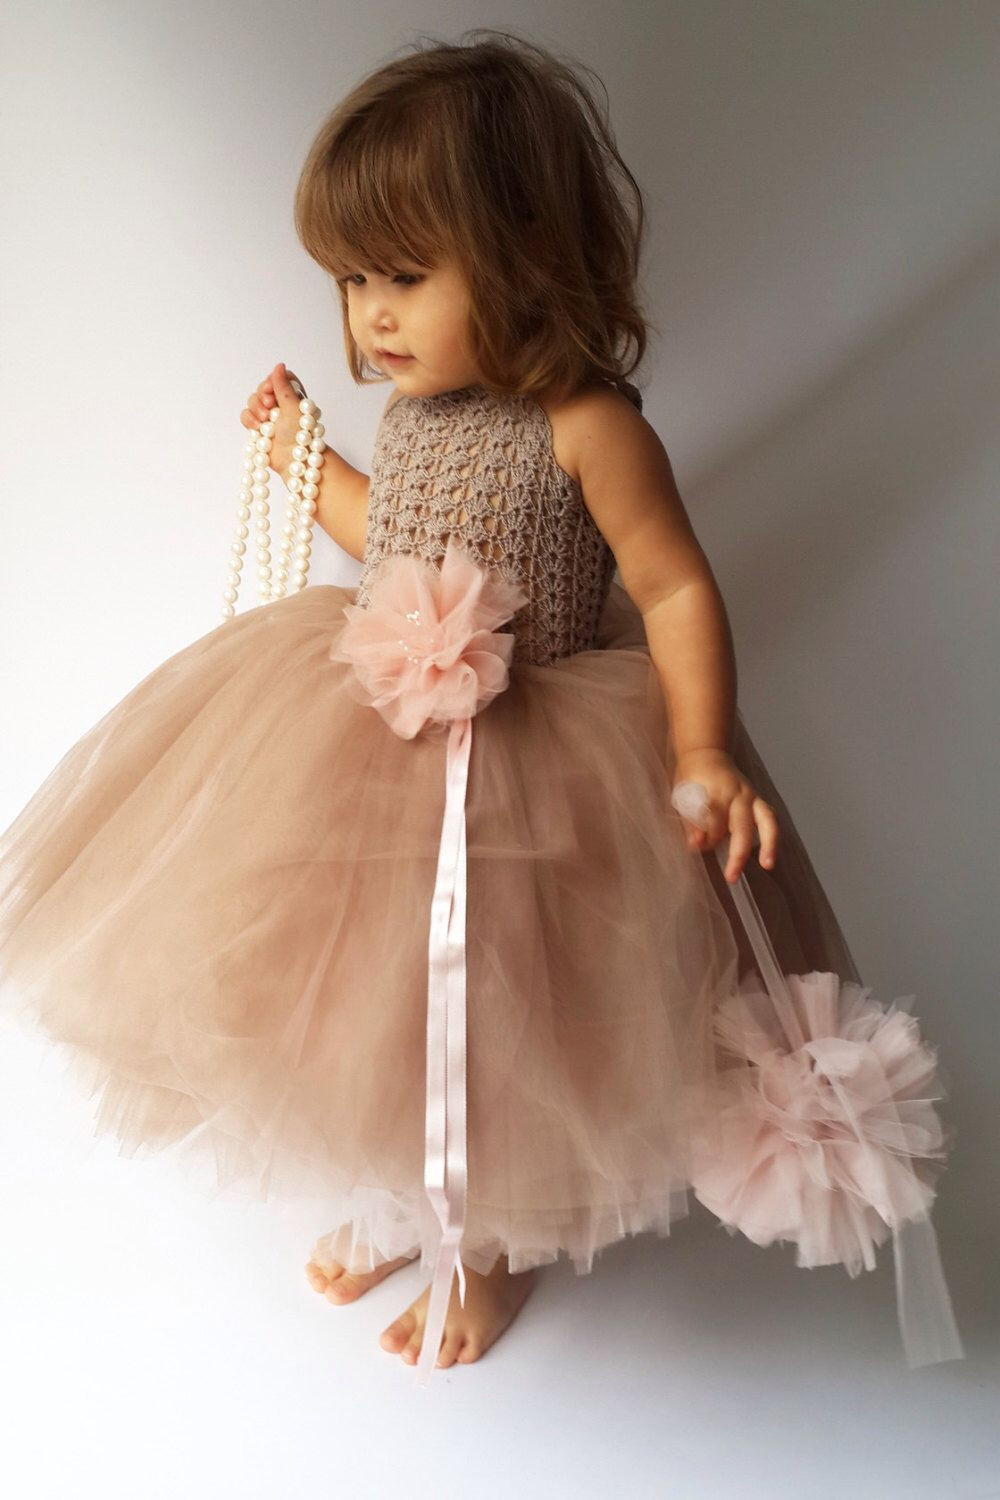 DIY Tutu Dresses For Toddlers
 Ankle Length Double Layered Puffy Tutu Dress Any custom